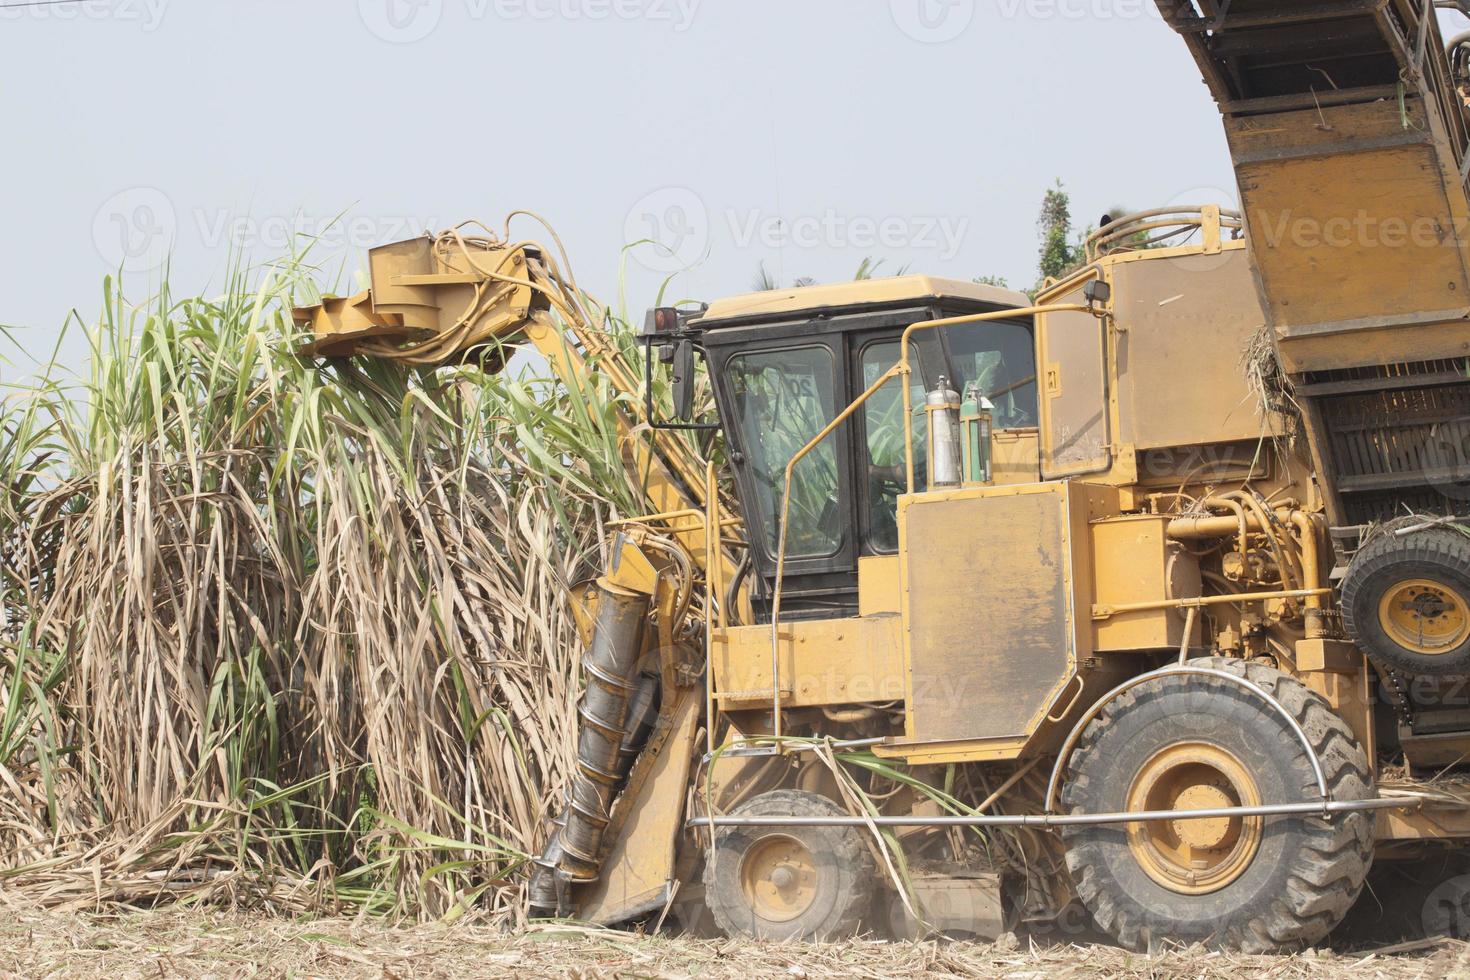 Sugarcane harvesters are cutting sugarcane and transporting it to trucks to deliver sugar mills during the harvesting season and converting the produce for consumption and export in rural Thailand. photo